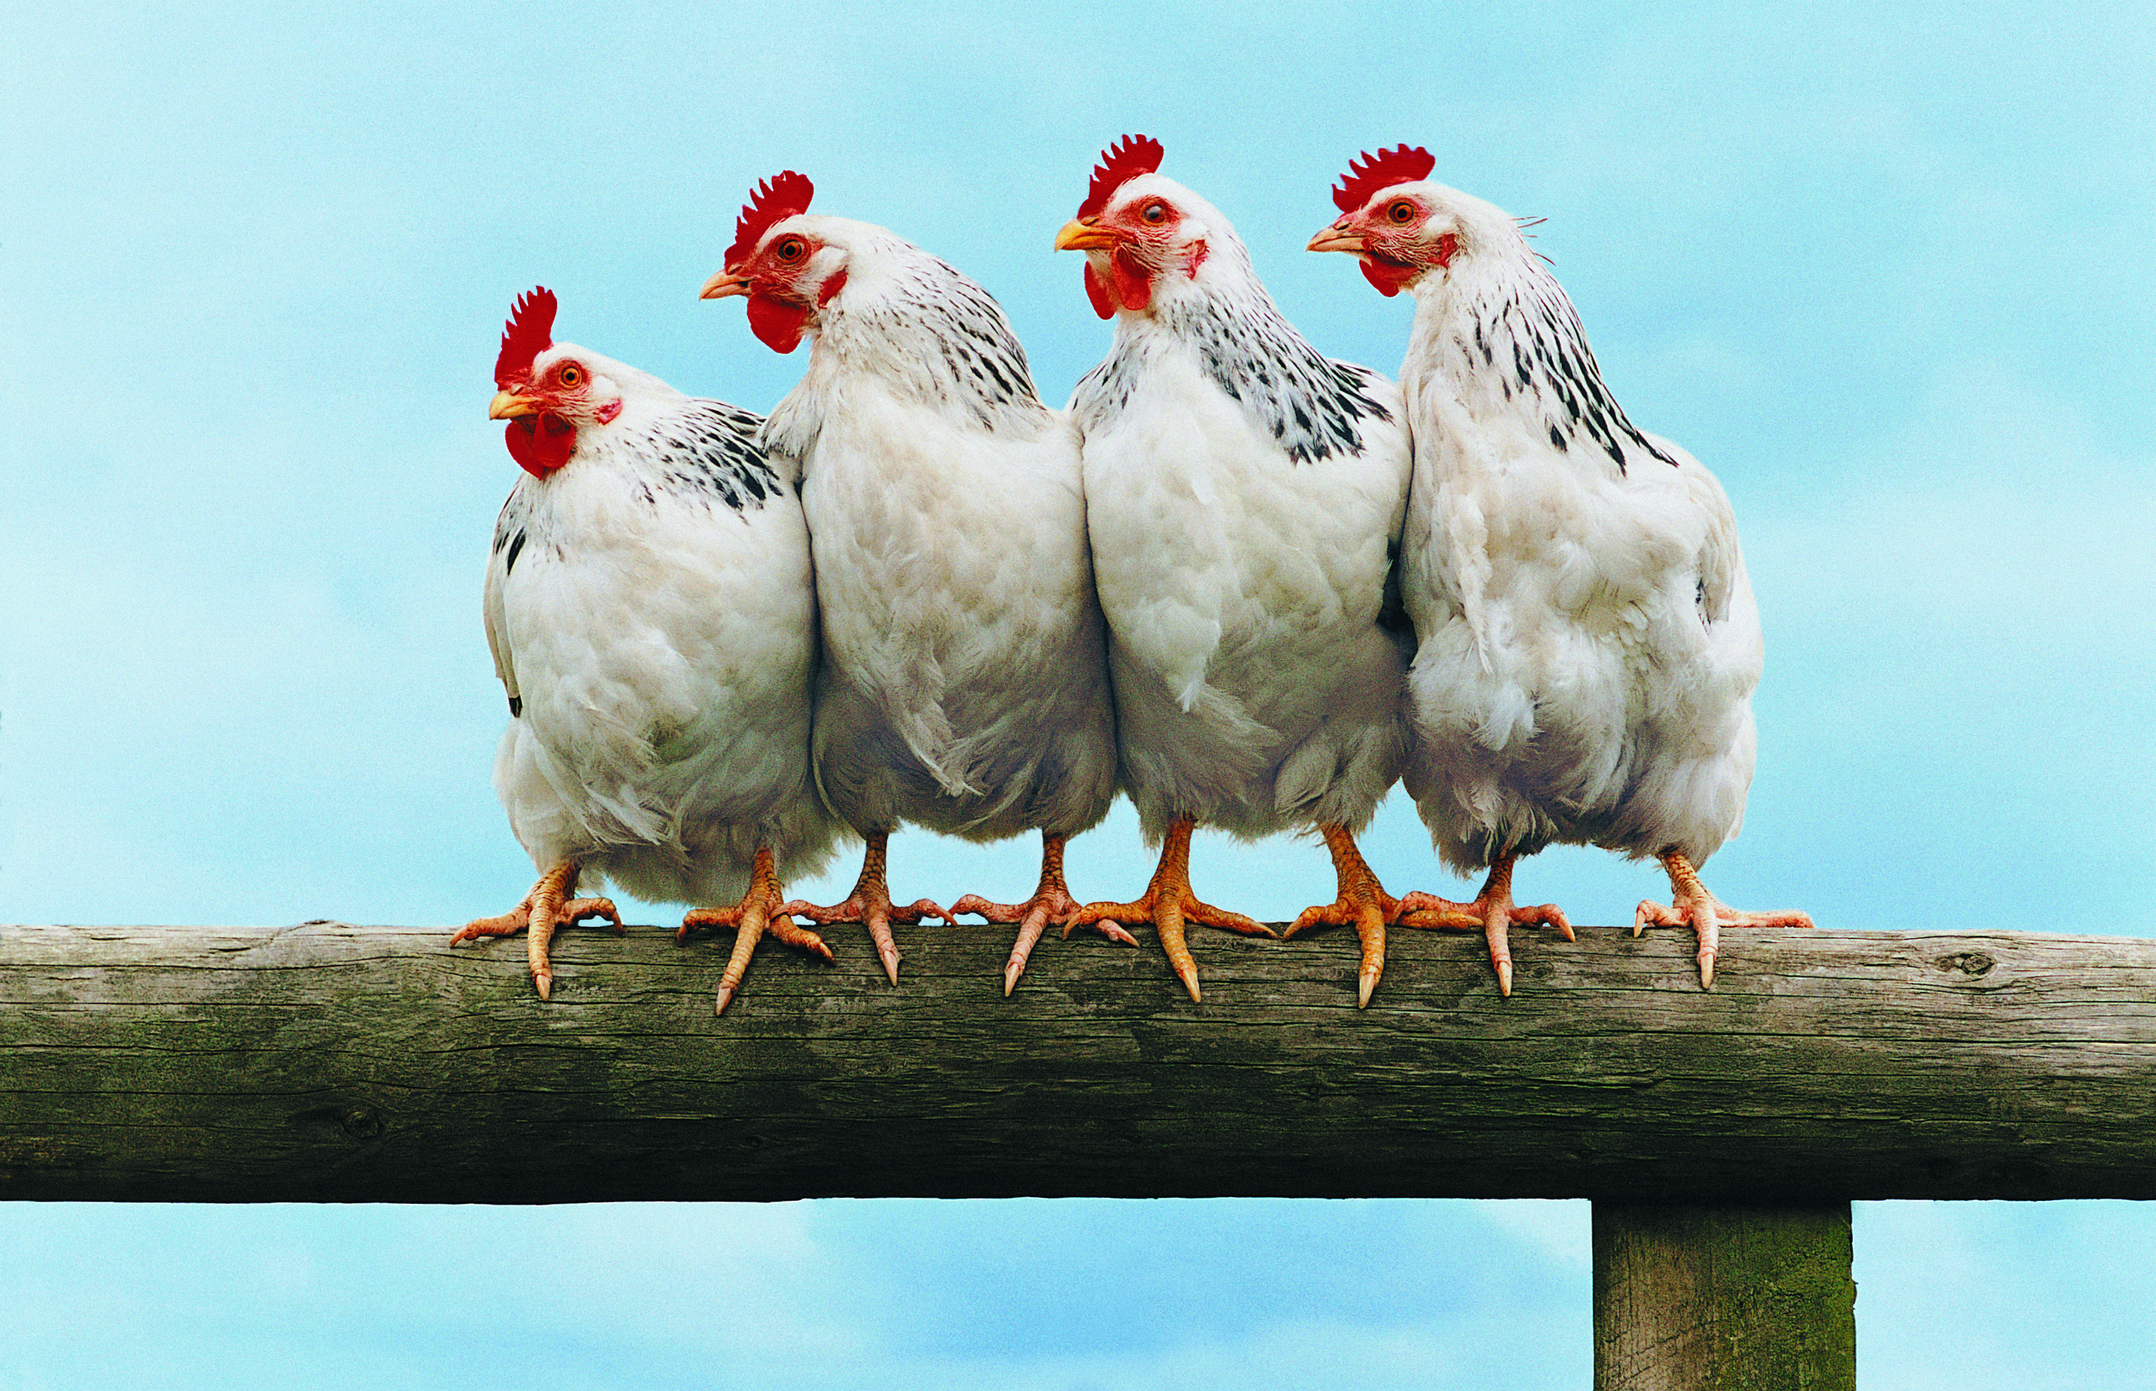 four-chickens-on-fencejpg